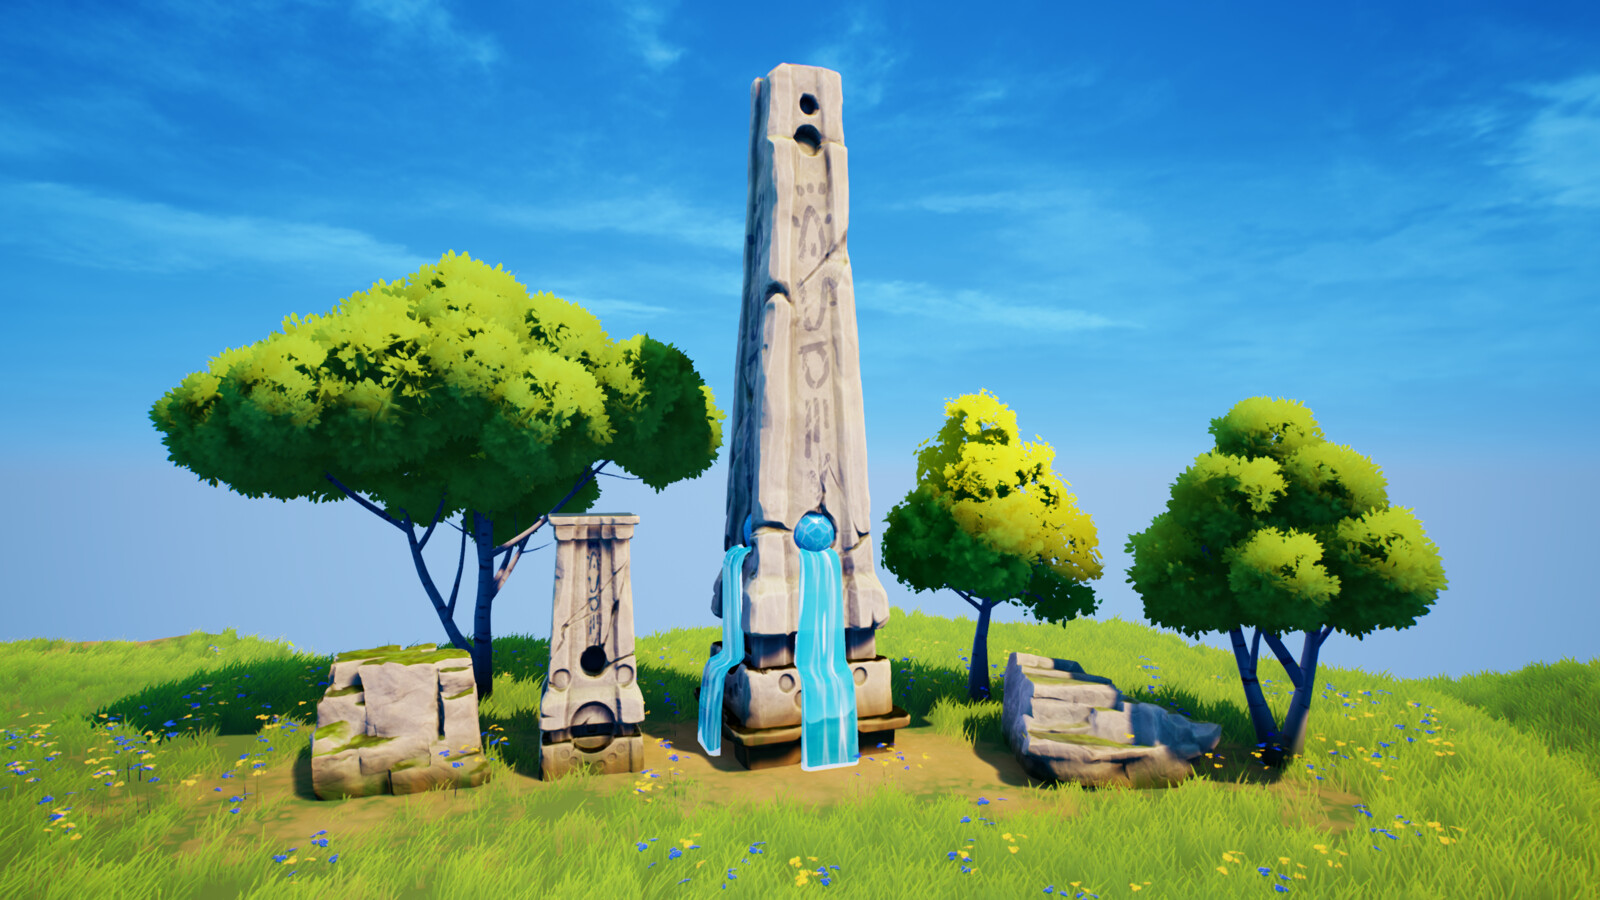 Sculpted ruins and rocks. Speedtreed trees.